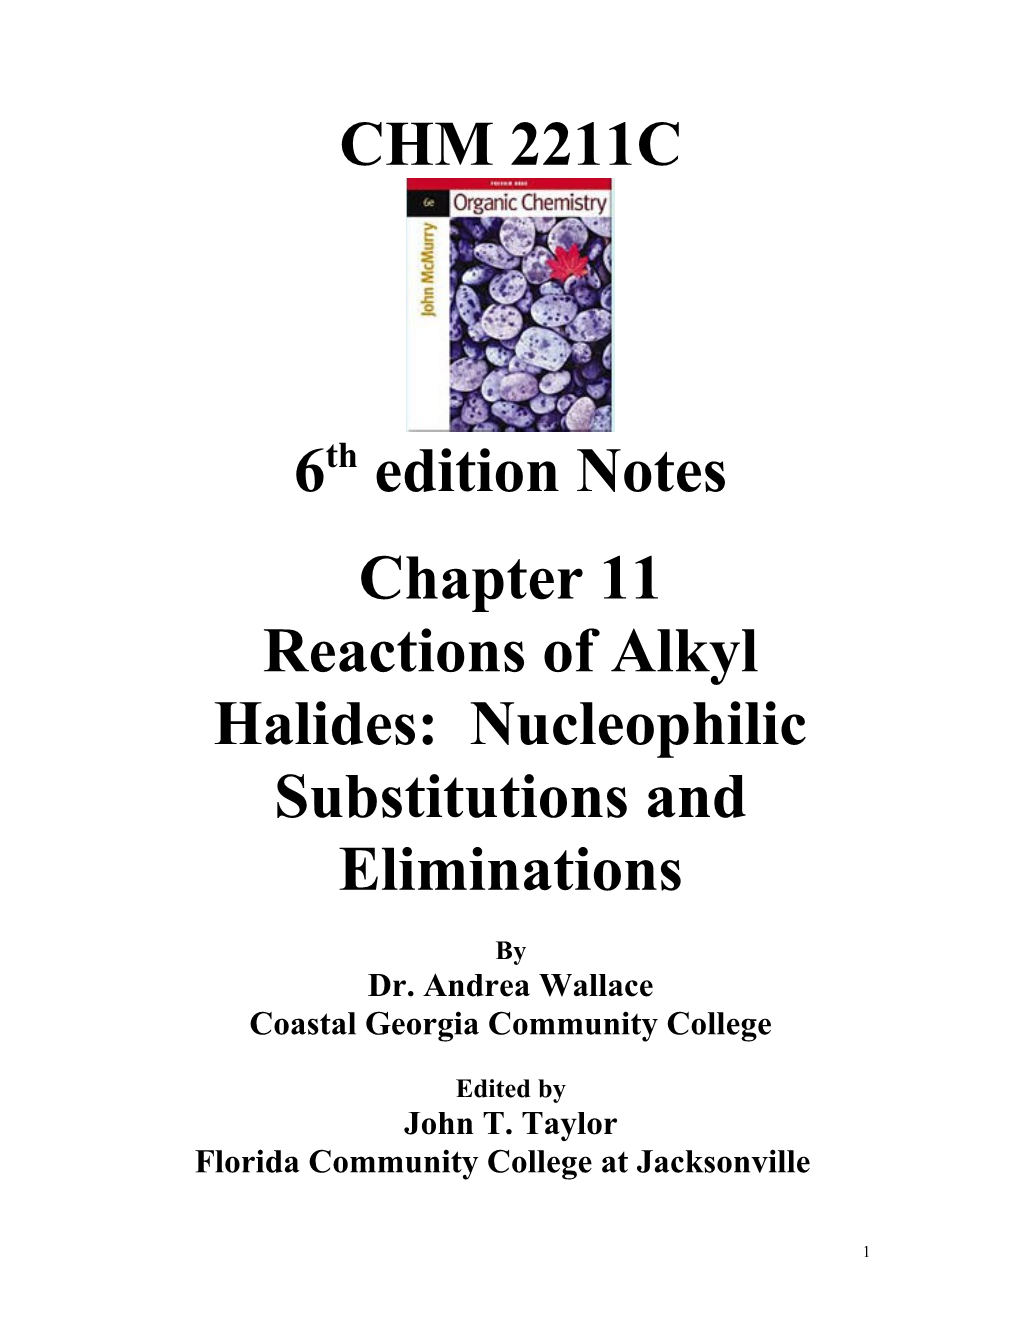 Reactions of Alkyl Halides: Nucleophilic Substitutions and Eliminations